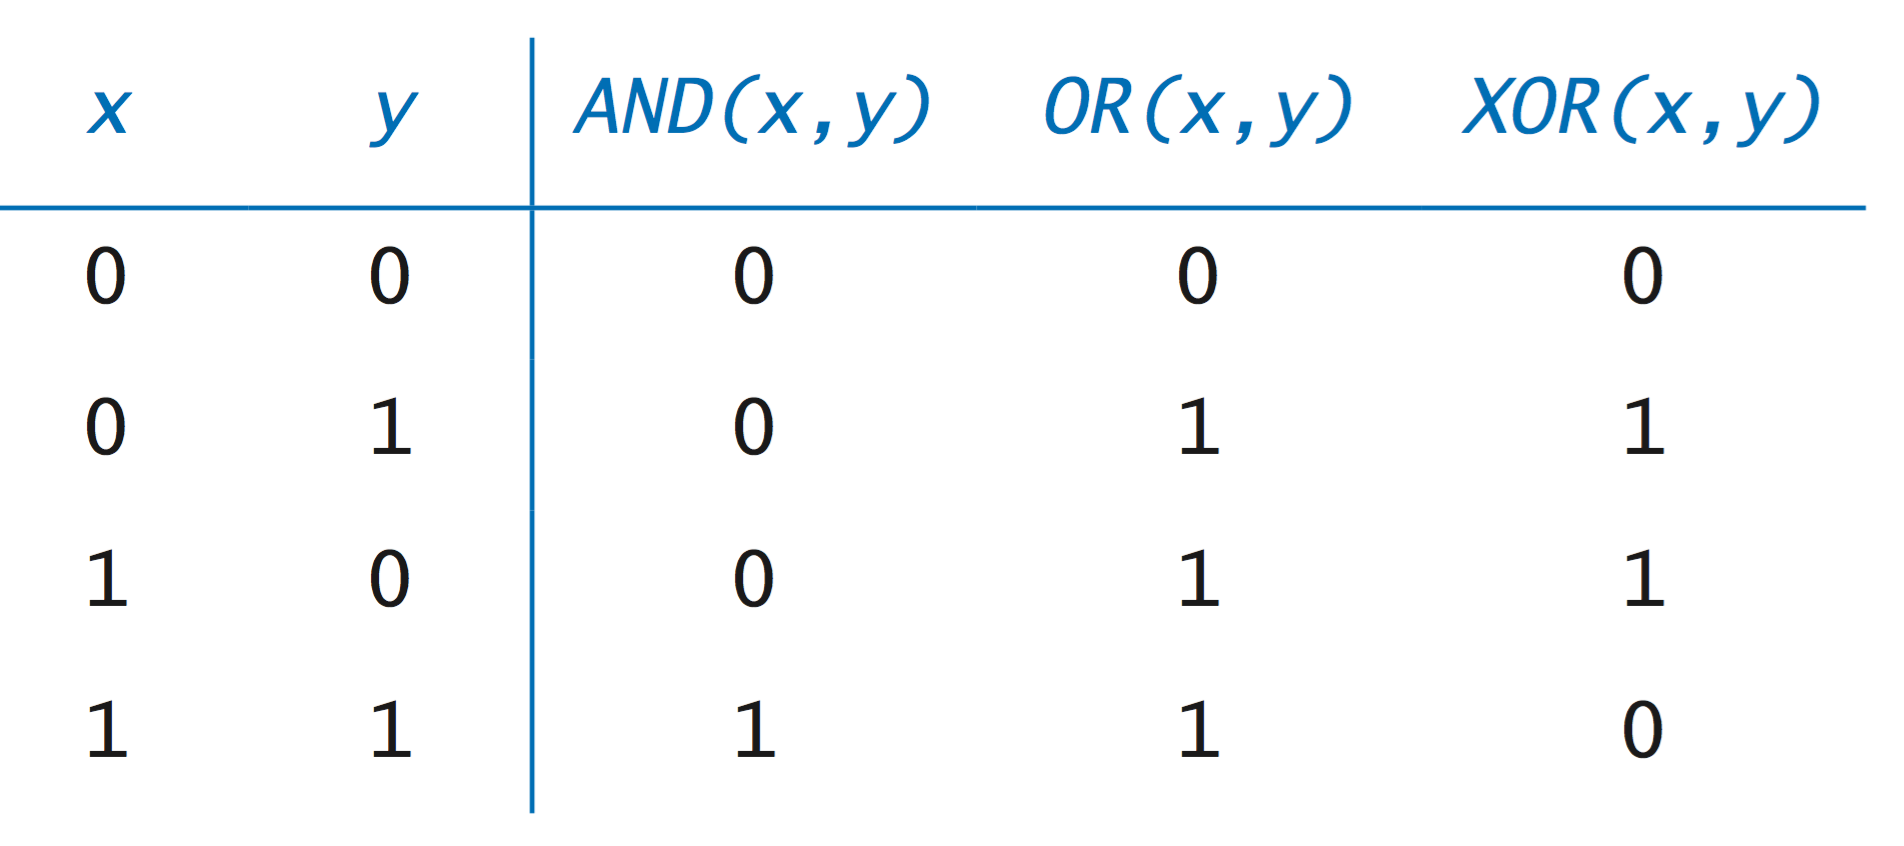 truth table for AND, OR, and XOR